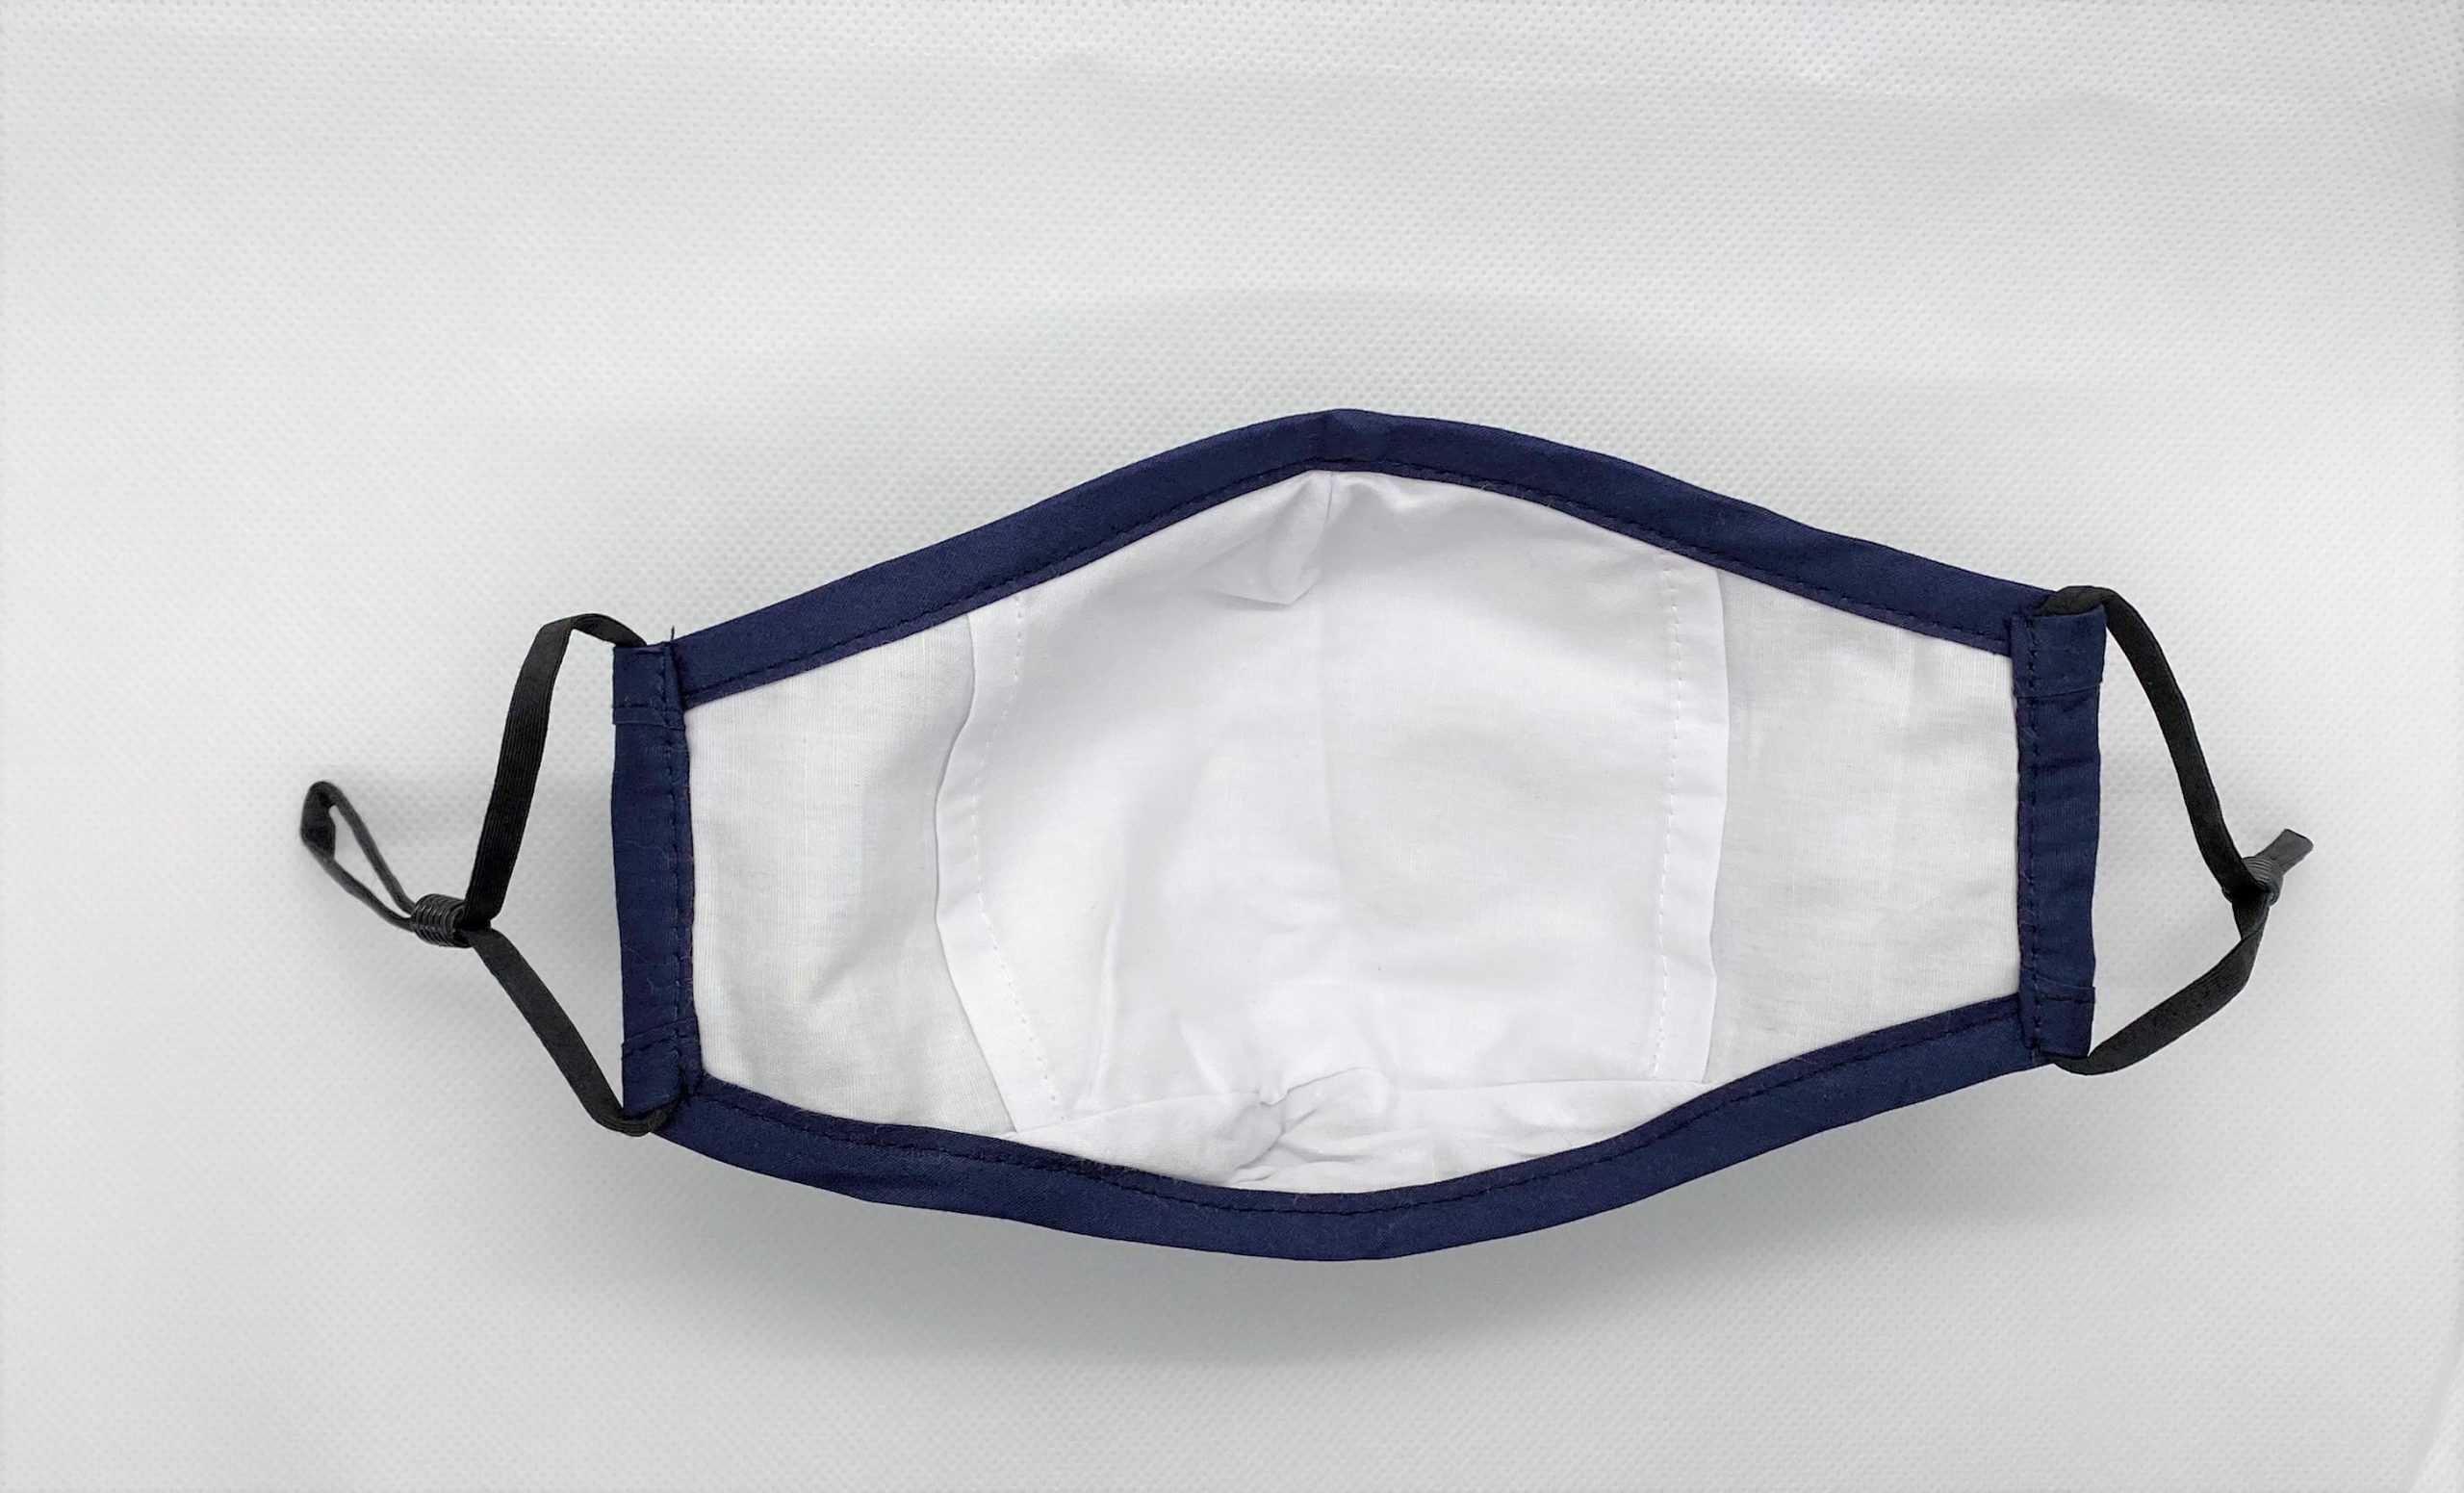 Navy blue mask with breathing valve - inner view. The valve is covered on the inside by two layers of fabric.